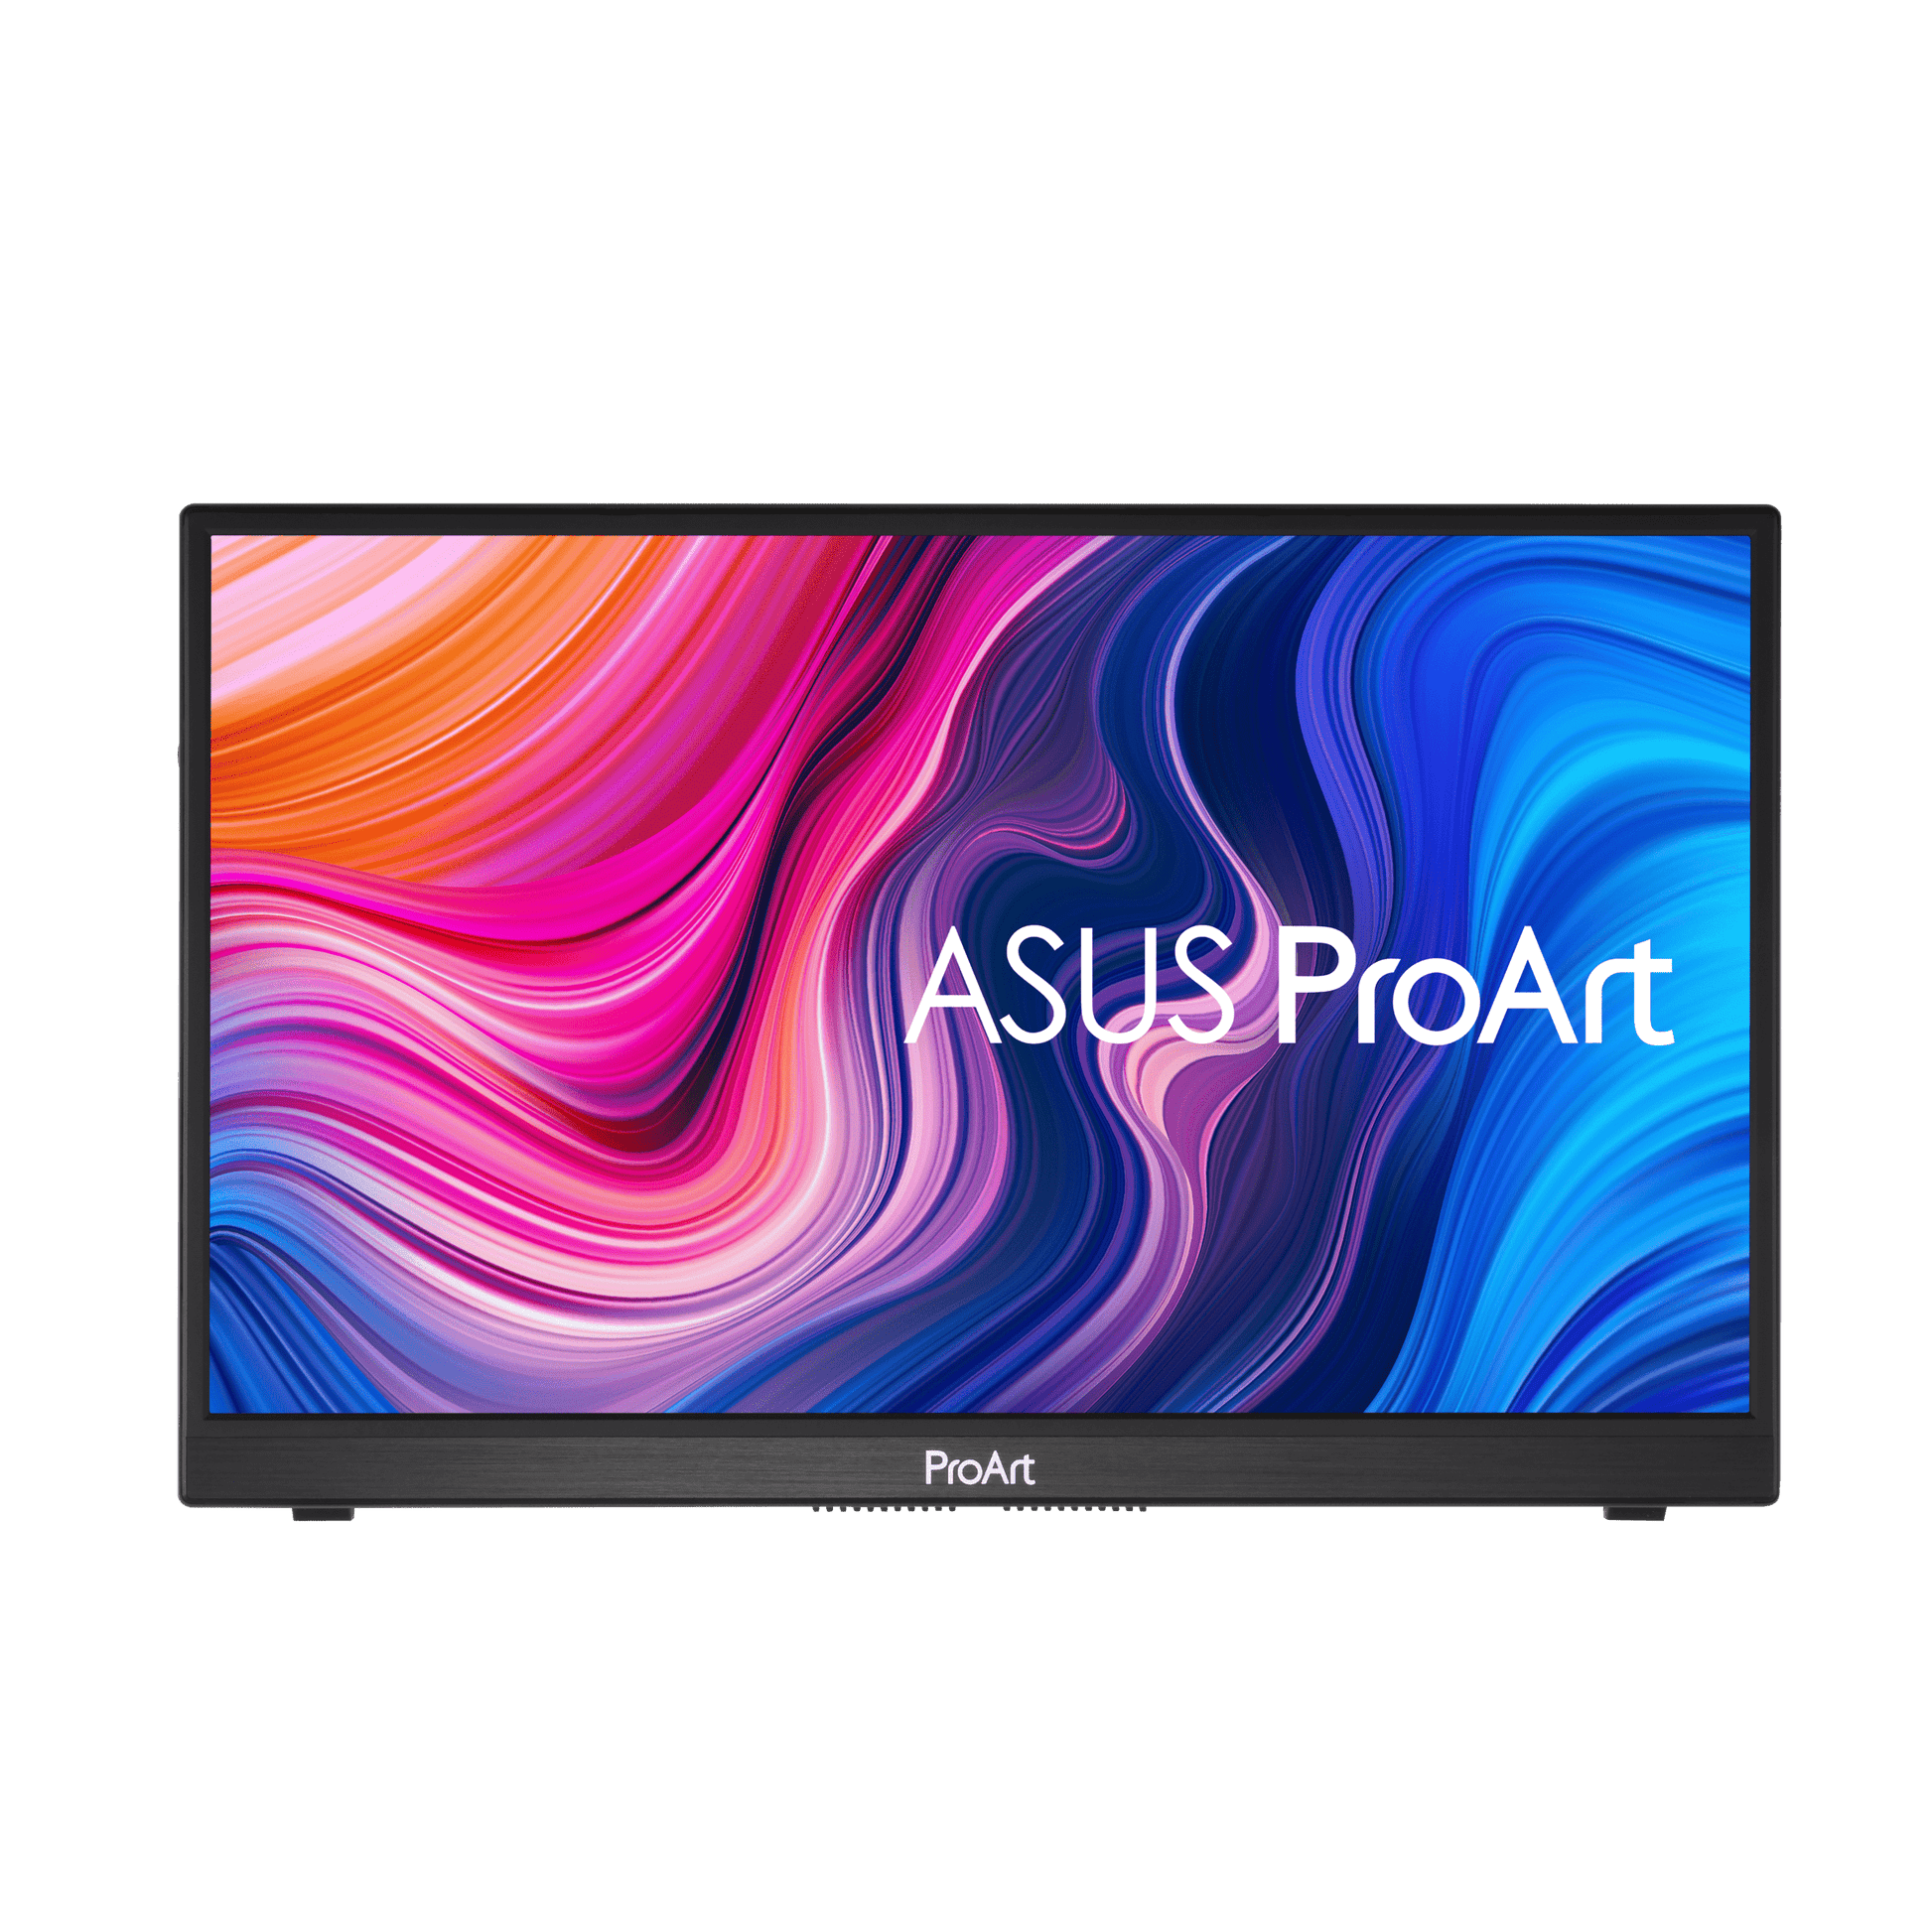 ASUS ProArt Display PA148CTV 14" Full HD Multi-Touch Portable IPS Monitor - Marknet Technology